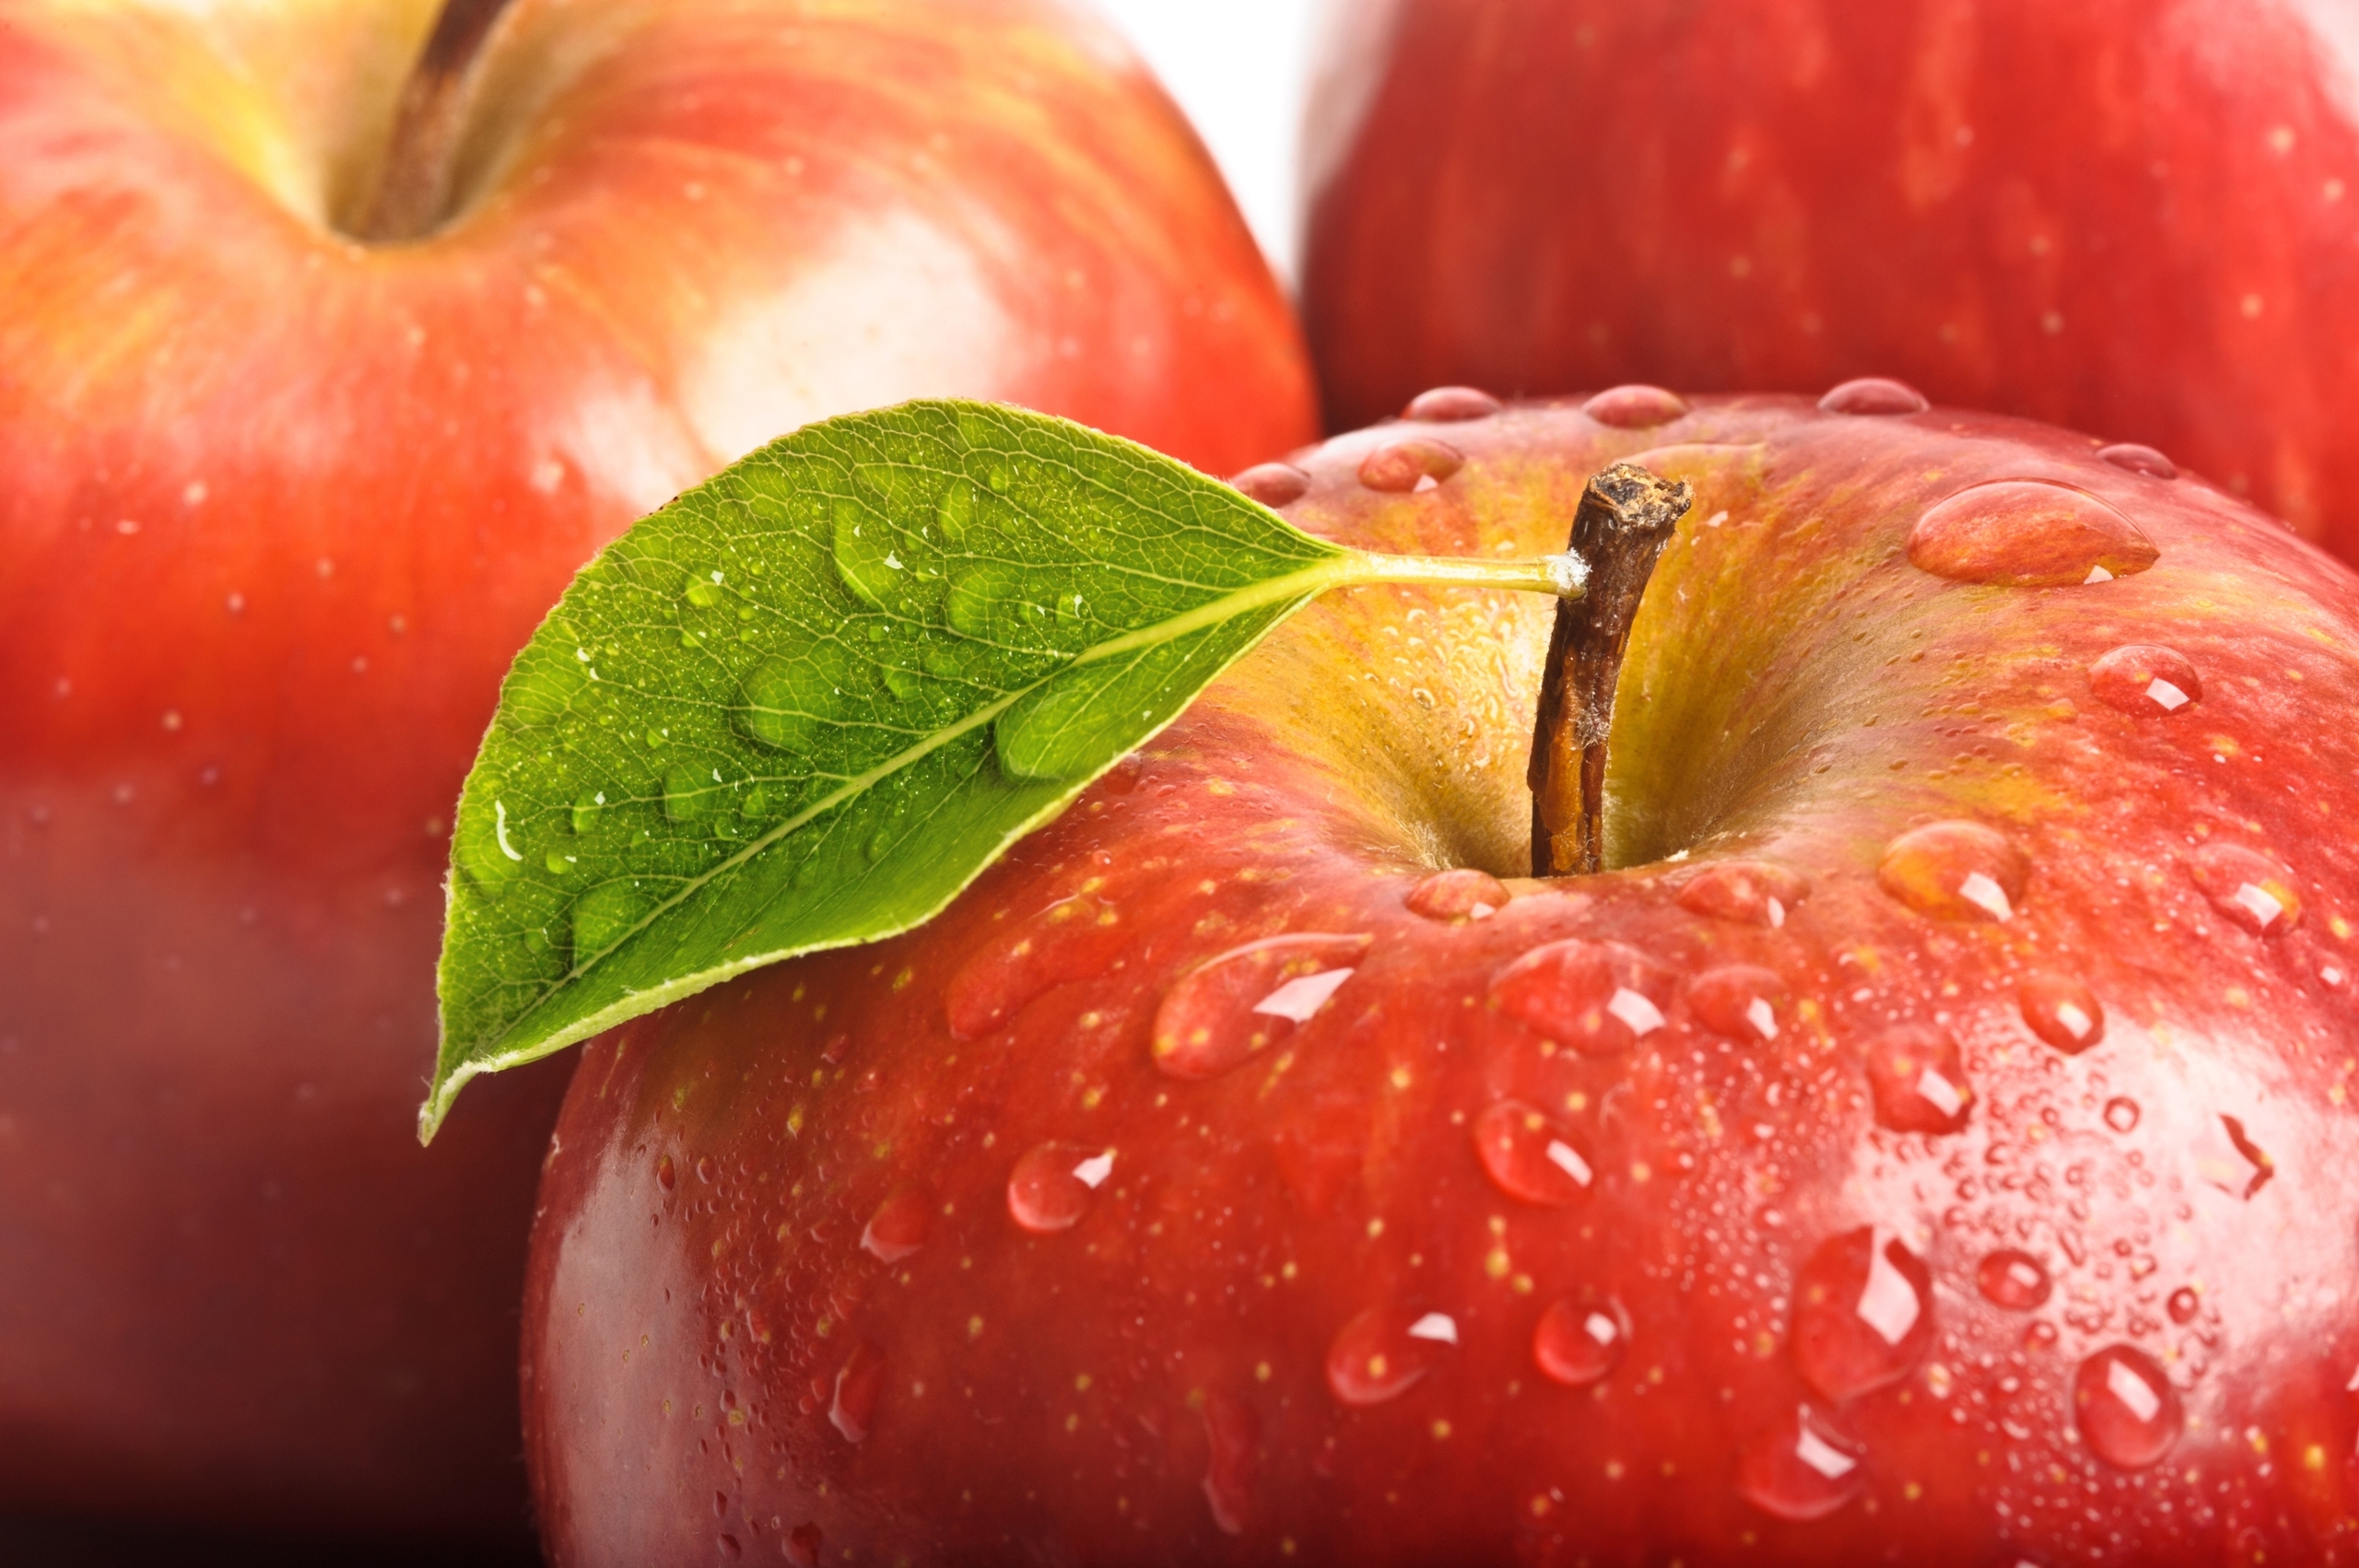 Download background drops, food, fruits, apples, red